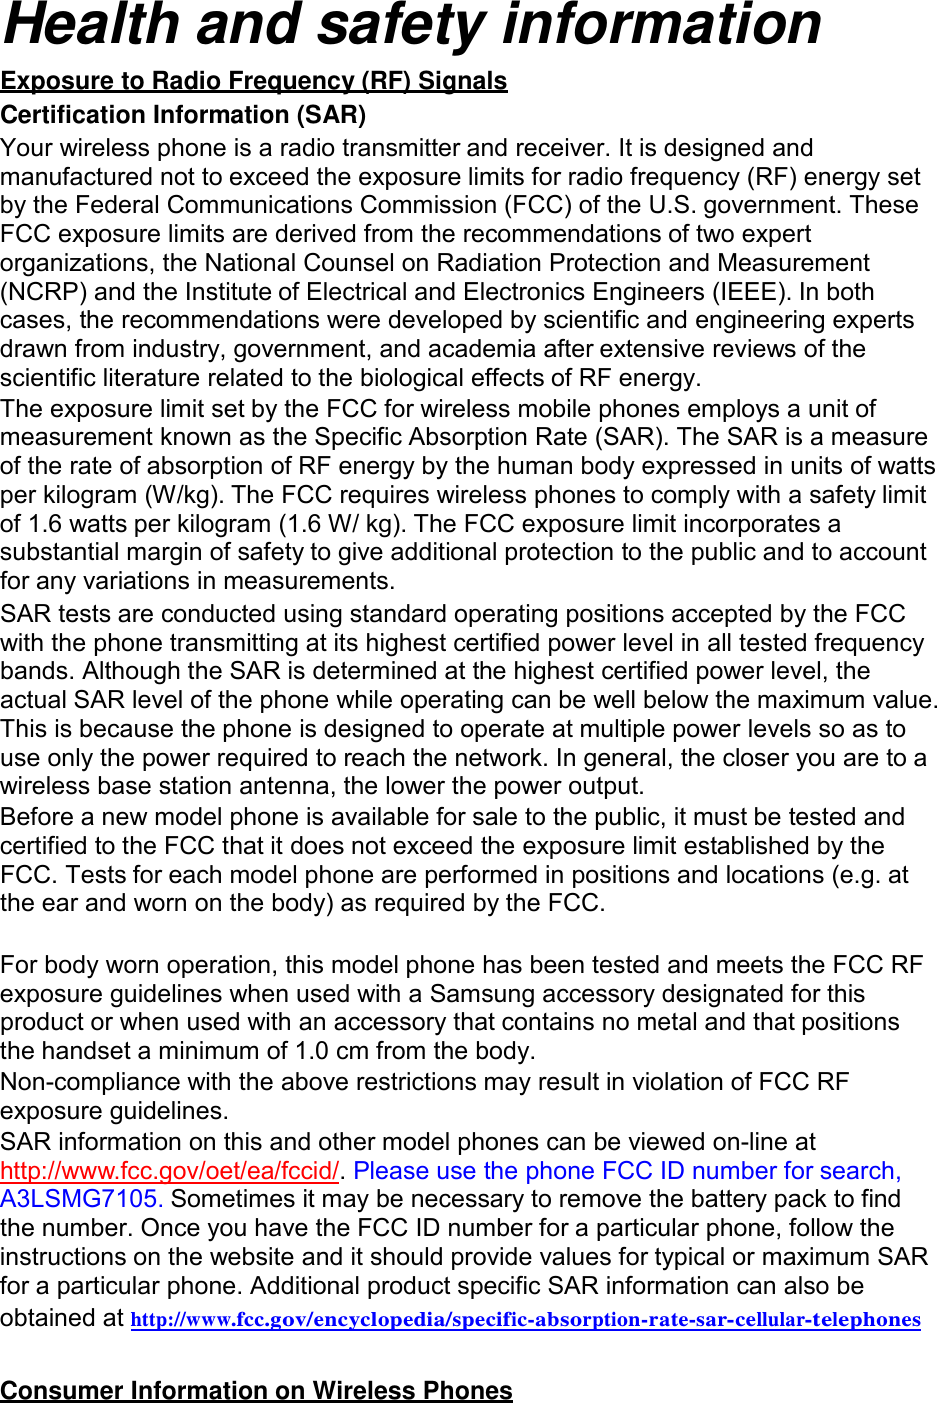  Health and safety information Exposure to Radio Frequency (RF) Signals Certification Information (SAR) Your wireless phone is a radio transmitter and receiver. It is designed and manufactured not to exceed the exposure limits for radio frequency (RF) energy set by the Federal Communications Commission (FCC) of the U.S. government. These FCC exposure limits are derived from the recommendations of two expert organizations, the National Counsel on Radiation Protection and Measurement (NCRP) and the Institute of Electrical and Electronics Engineers (IEEE). In both cases, the recommendations were developed by scientific and engineering experts drawn from industry, government, and academia after extensive reviews of the scientific literature related to the biological effects of RF energy. The exposure limit set by the FCC for wireless mobile phones employs a unit of measurement known as the Specific Absorption Rate (SAR). The SAR is a measure of the rate of absorption of RF energy by the human body expressed in units of watts per kilogram (W/kg). The FCC requires wireless phones to comply with a safety limit of 1.6 watts per kilogram (1.6 W/ kg). The FCC exposure limit incorporates a substantial margin of safety to give additional protection to the public and to account for any variations in measurements. SAR tests are conducted using standard operating positions accepted by the FCC with the phone transmitting at its highest certified power level in all tested frequency bands. Although the SAR is determined at the highest certified power level, the actual SAR level of the phone while operating can be well below the maximum value. This is because the phone is designed to operate at multiple power levels so as to use only the power required to reach the network. In general, the closer you are to a wireless base station antenna, the lower the power output. Before a new model phone is available for sale to the public, it must be tested and certified to the FCC that it does not exceed the exposure limit established by the FCC. Tests for each model phone are performed in positions and locations (e.g. at the ear and worn on the body) as required by the FCC.   For body worn operation, this model phone has been tested and meets the FCC RF exposure guidelines when used with a Samsung accessory designated for this product or when used with an accessory that contains no metal and that positions the handset a minimum of 1.0 cm from the body. Non-compliance with the above restrictions may result in violation of FCC RF exposure guidelines. SAR information on this and other model phones can be viewed on-line at http://www.fcc.gov/oet/ea/fccid/. Please use the phone FCC ID number for search, A3LSMG7105. Sometimes it may be necessary to remove the battery pack to find the number. Once you have the FCC ID number for a particular phone, follow the instructions on the website and it should provide values for typical or maximum SAR for a particular phone. Additional product specific SAR information can also be obtained at  http://www.fcc.gov/encyclopedia/specific-absorption-rate-sar-cellular-telephones   Consumer Information on Wireless Phones 